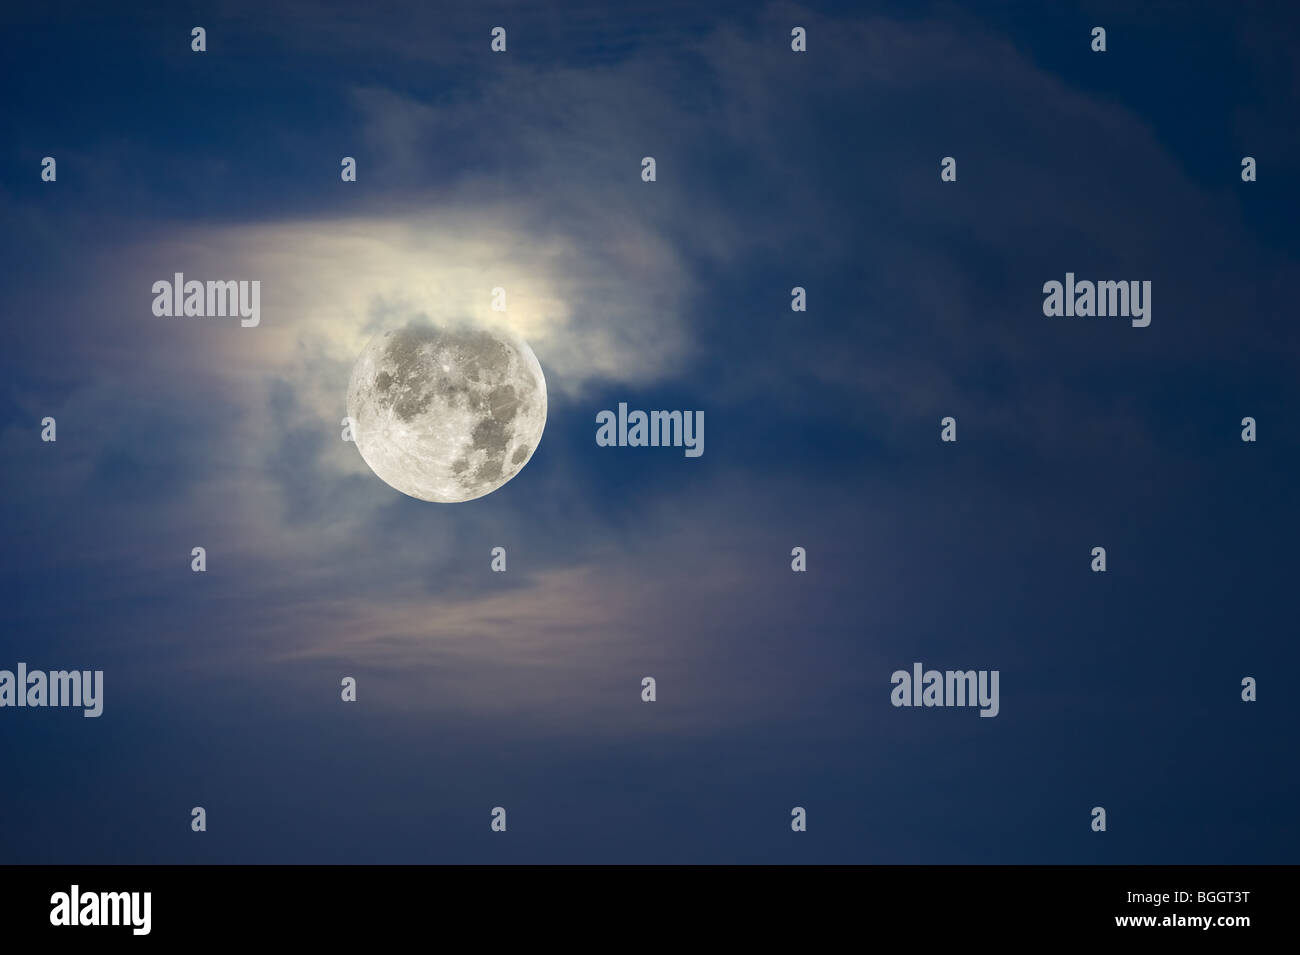 A brightly lit full moon lights up the cloudy, hazy sky. Stock Photo